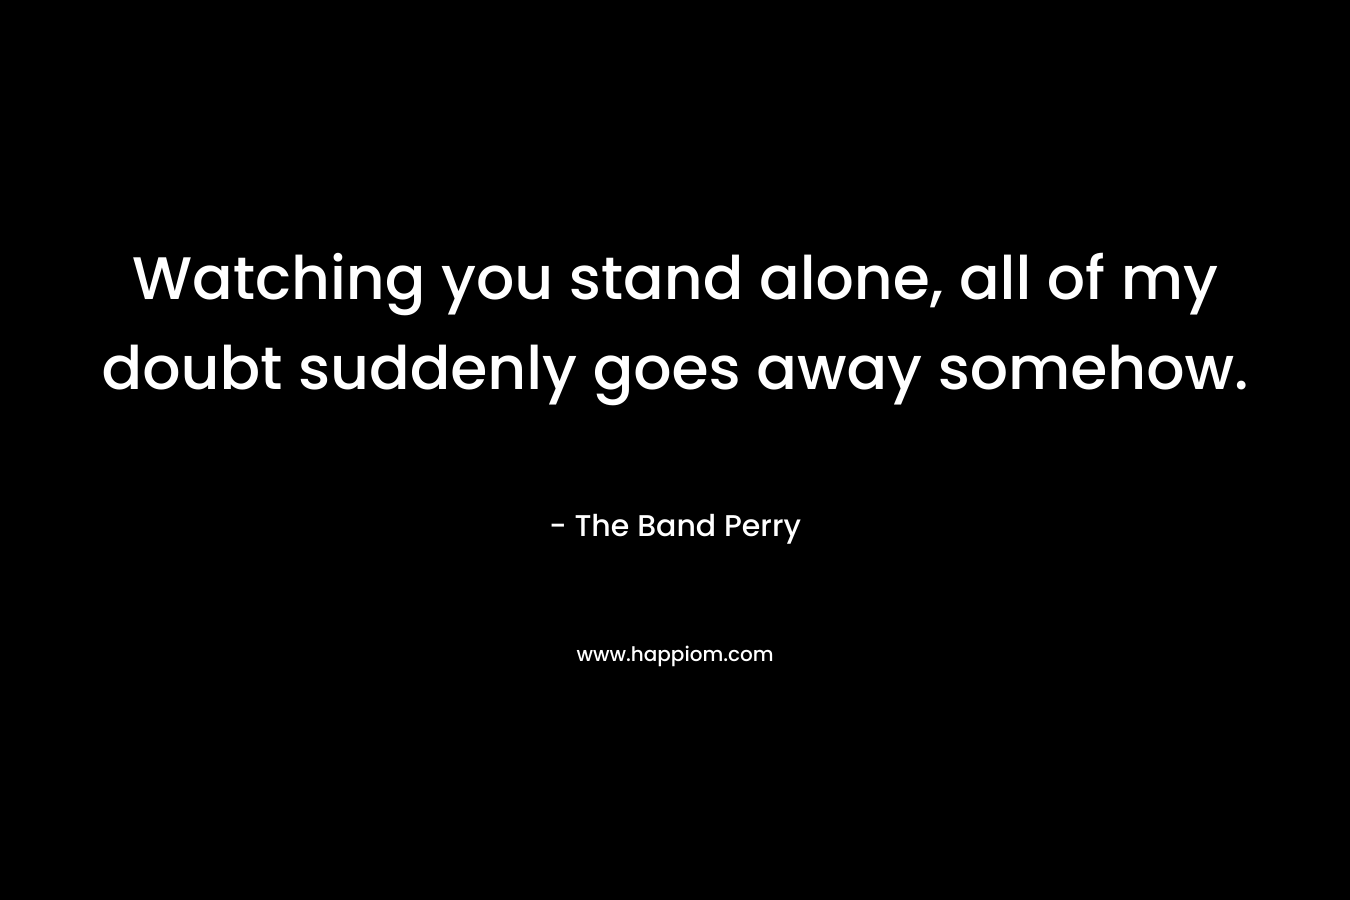 Watching you stand alone, all of my doubt suddenly goes away somehow. – The Band Perry